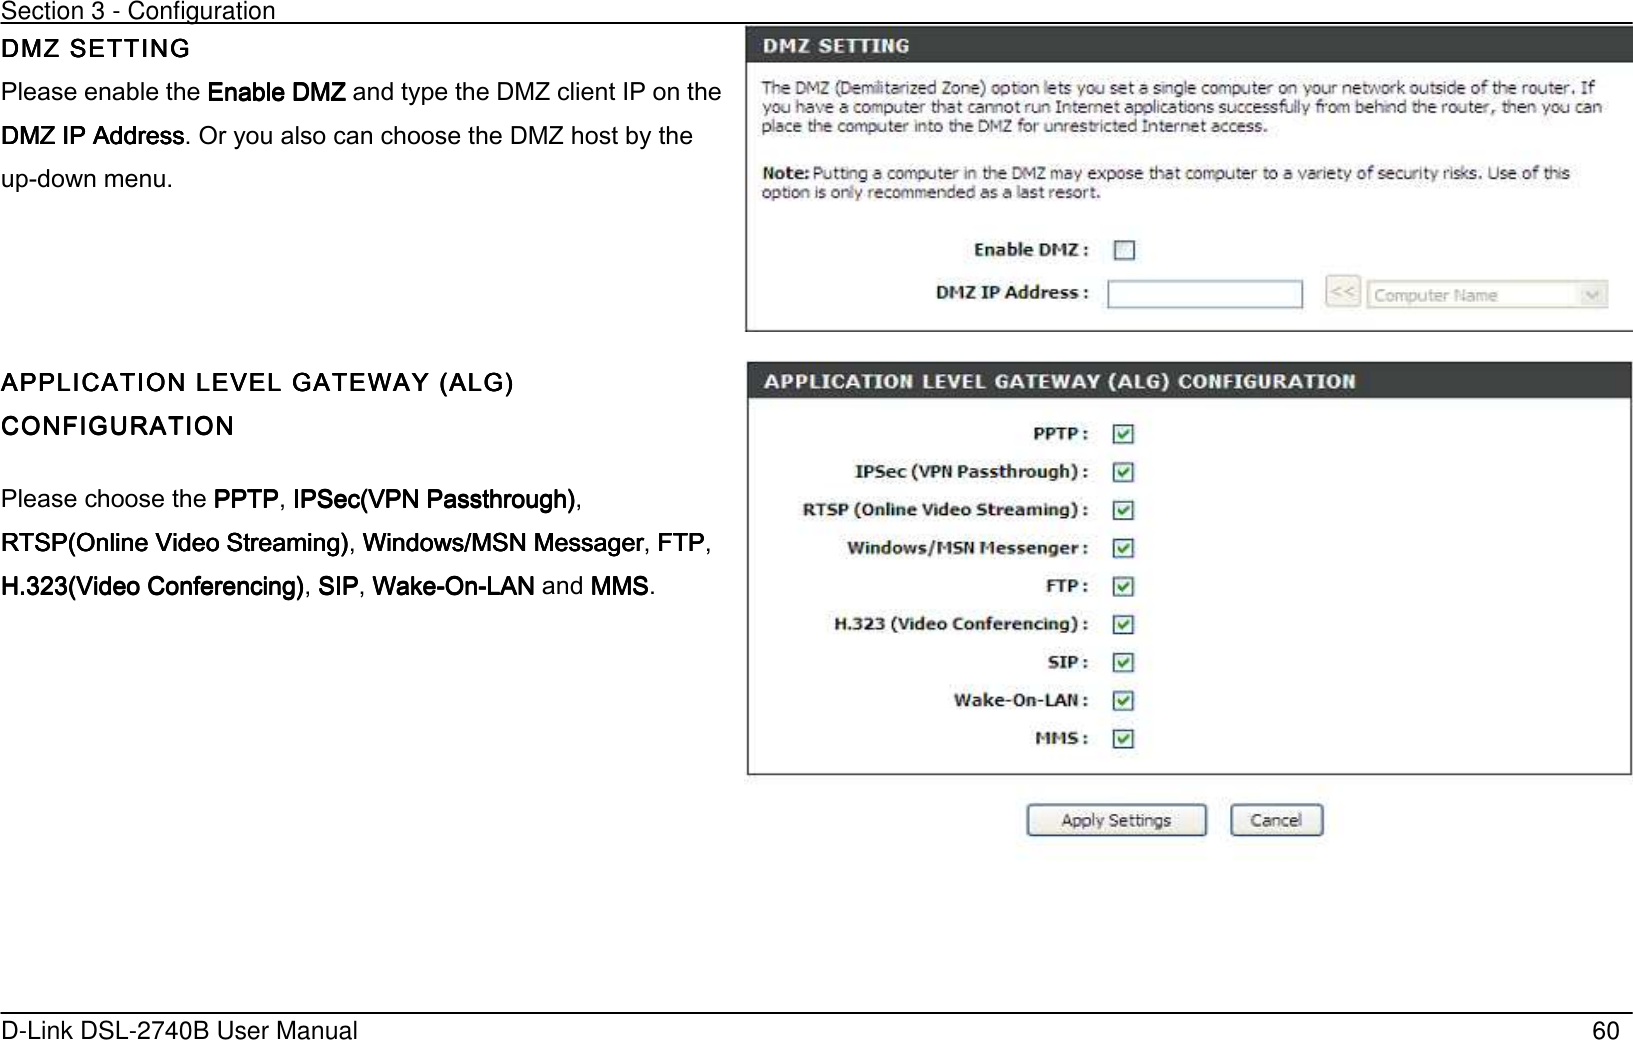 Section 3 - Configuration   D-Link DSL-2740B User Manual                                                  60 DMZ SETTINGDMZ SETTINGDMZ SETTINGDMZ SETTING Please enable the Enable DMZEnable DMZEnable DMZEnable DMZ and type the DMZ client IP on the DMZ IP AddressDMZ IP AddressDMZ IP AddressDMZ IP Address. Or you also can choose the DMZ host by the up-down menu.     APPLICATIOAPPLICATIOAPPLICATIOAPPLICATION LEVEL GATEWAY (ALGN LEVEL GATEWAY (ALGN LEVEL GATEWAY (ALGN LEVEL GATEWAY (ALG’ ’ ’ ’ CONFIGURATIONCONFIGURATIONCONFIGURATIONCONFIGURATION    Please choose the PPTPPPTPPPTPPPTP, IPSec(VPN Passthrough’ IPSec(VPN Passthrough’ IPSec(VPN Passthrough’ IPSec(VPN Passthrough’, RTSP(Online Video Streaming’RTSP(Online Video Streaming’RTSP(Online Video Streaming’RTSP(Online Video Streaming’, Windows/MSN MessagerWindows/MSN MessagerWindows/MSN MessagerWindows/MSN Messager, FTPFTPFTPFTP, H.323(Video Conferencing’H.323(Video Conferencing’H.323(Video Conferencing’H.323(Video Conferencing’, SIPSIPSIPSIP, WakeWakeWakeWake----OnOnOnOn----LANLANLANLAN and MMSMMSMMSMMS.      